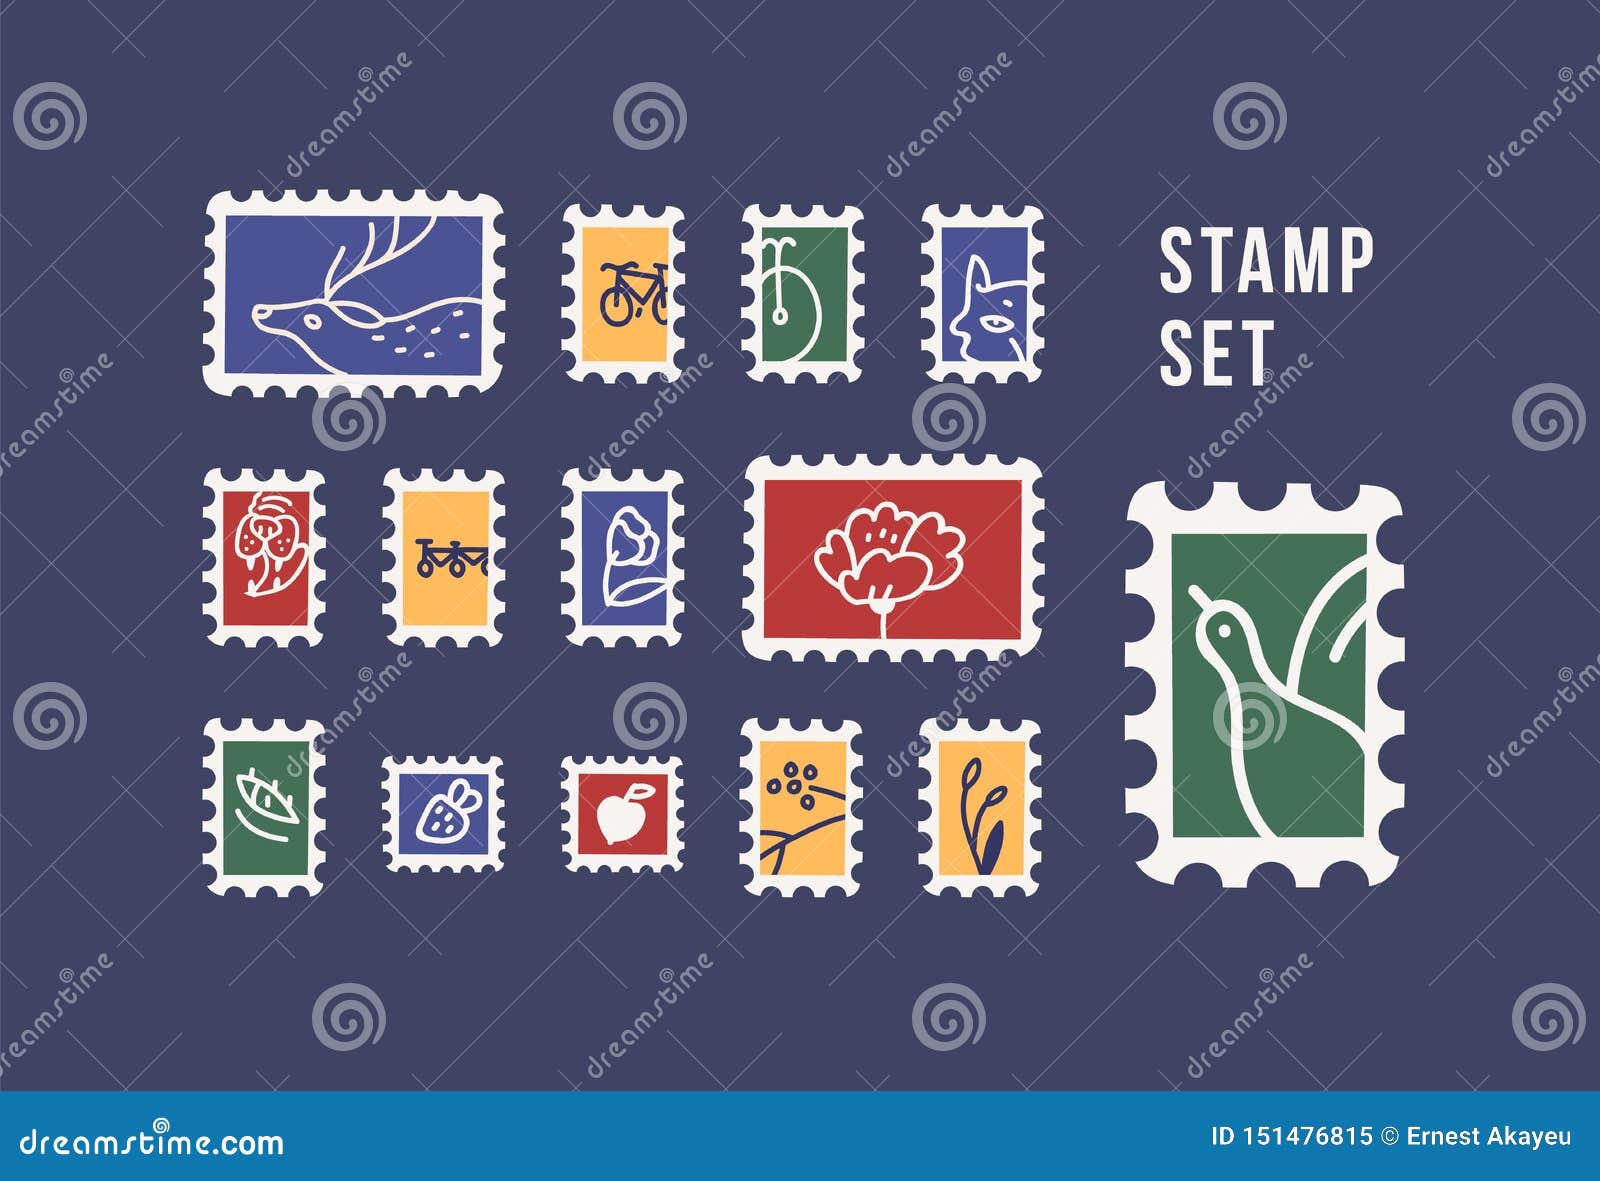 collection of postage stamps with animals, birds, flowers and fruits  on dark background. philately set. bundle